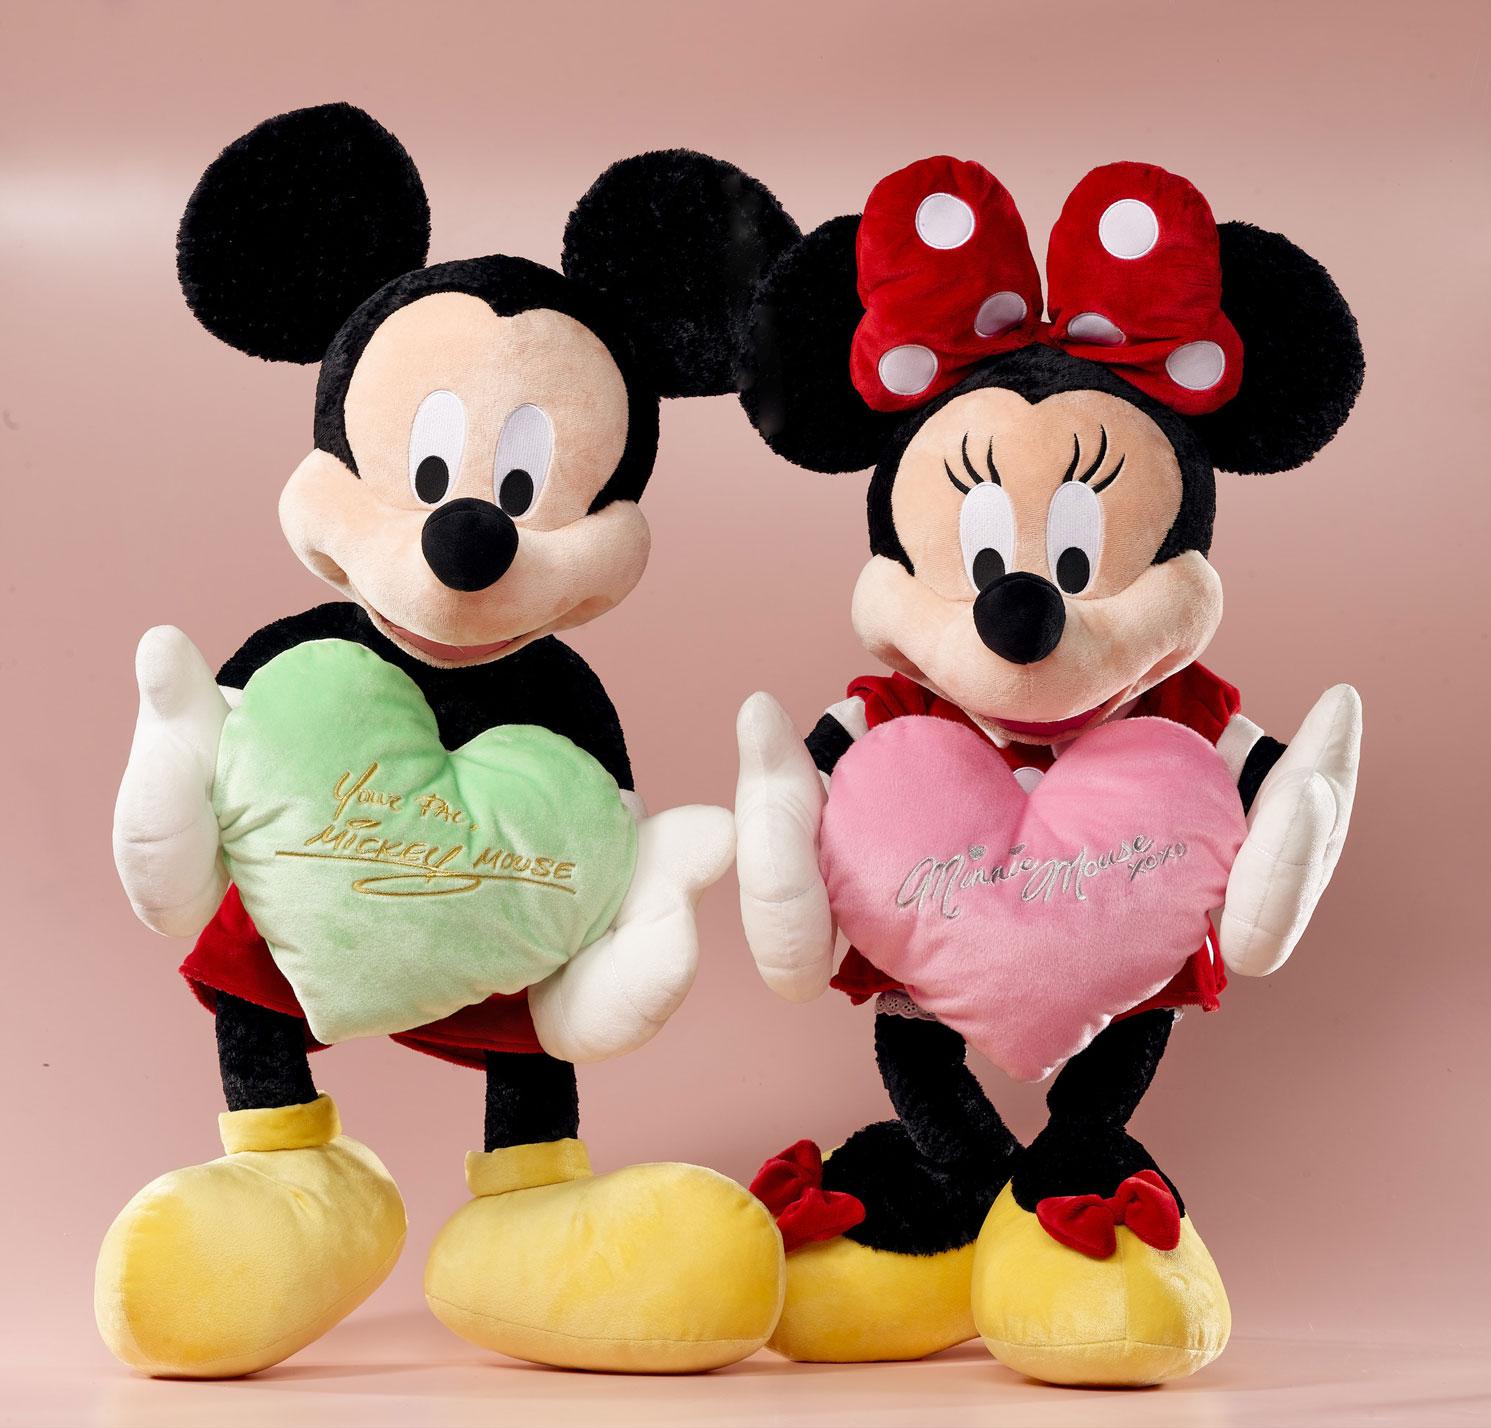 Free Mickey Mouse And Minnie Mouse Love, Download Free Clip